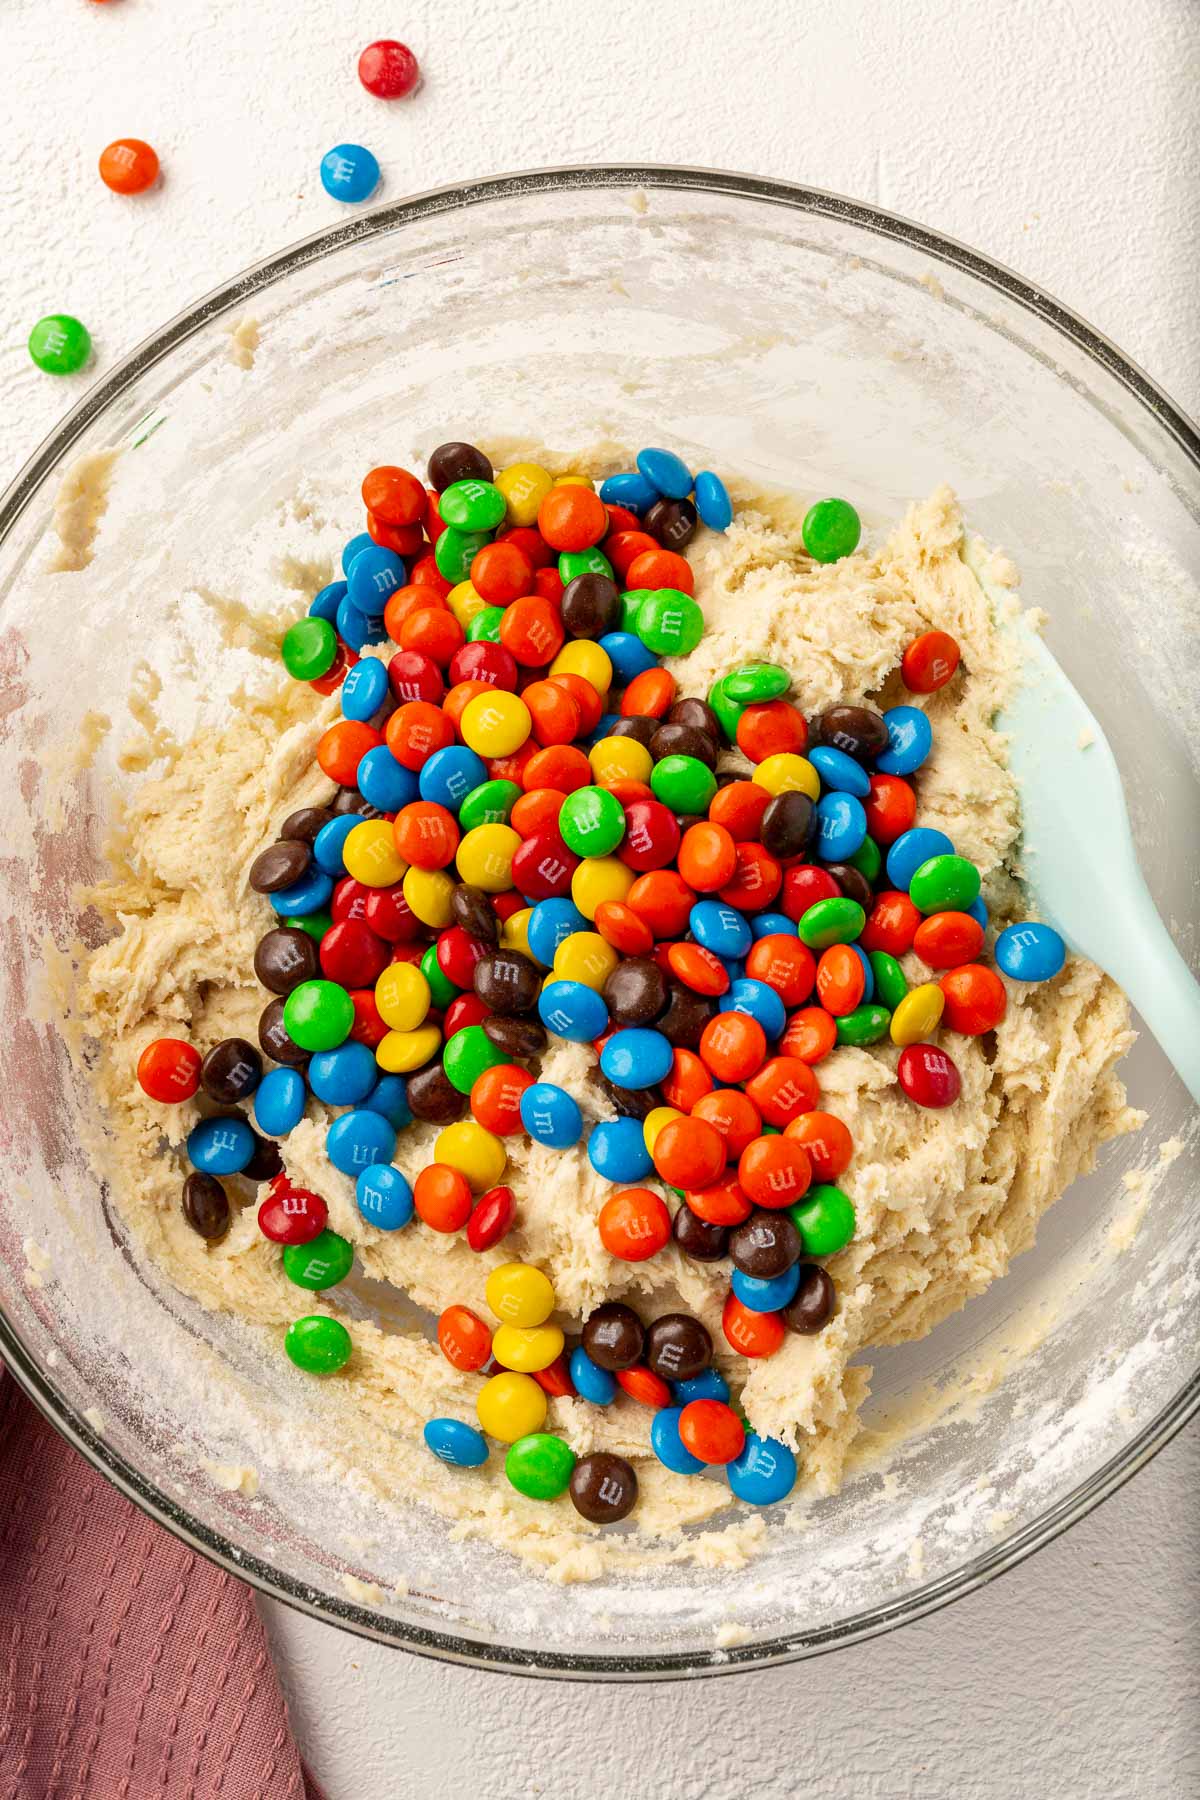 A glass mixing bowl with gluten-free sugar cookie dough topped with M&Ms before mixing together. I